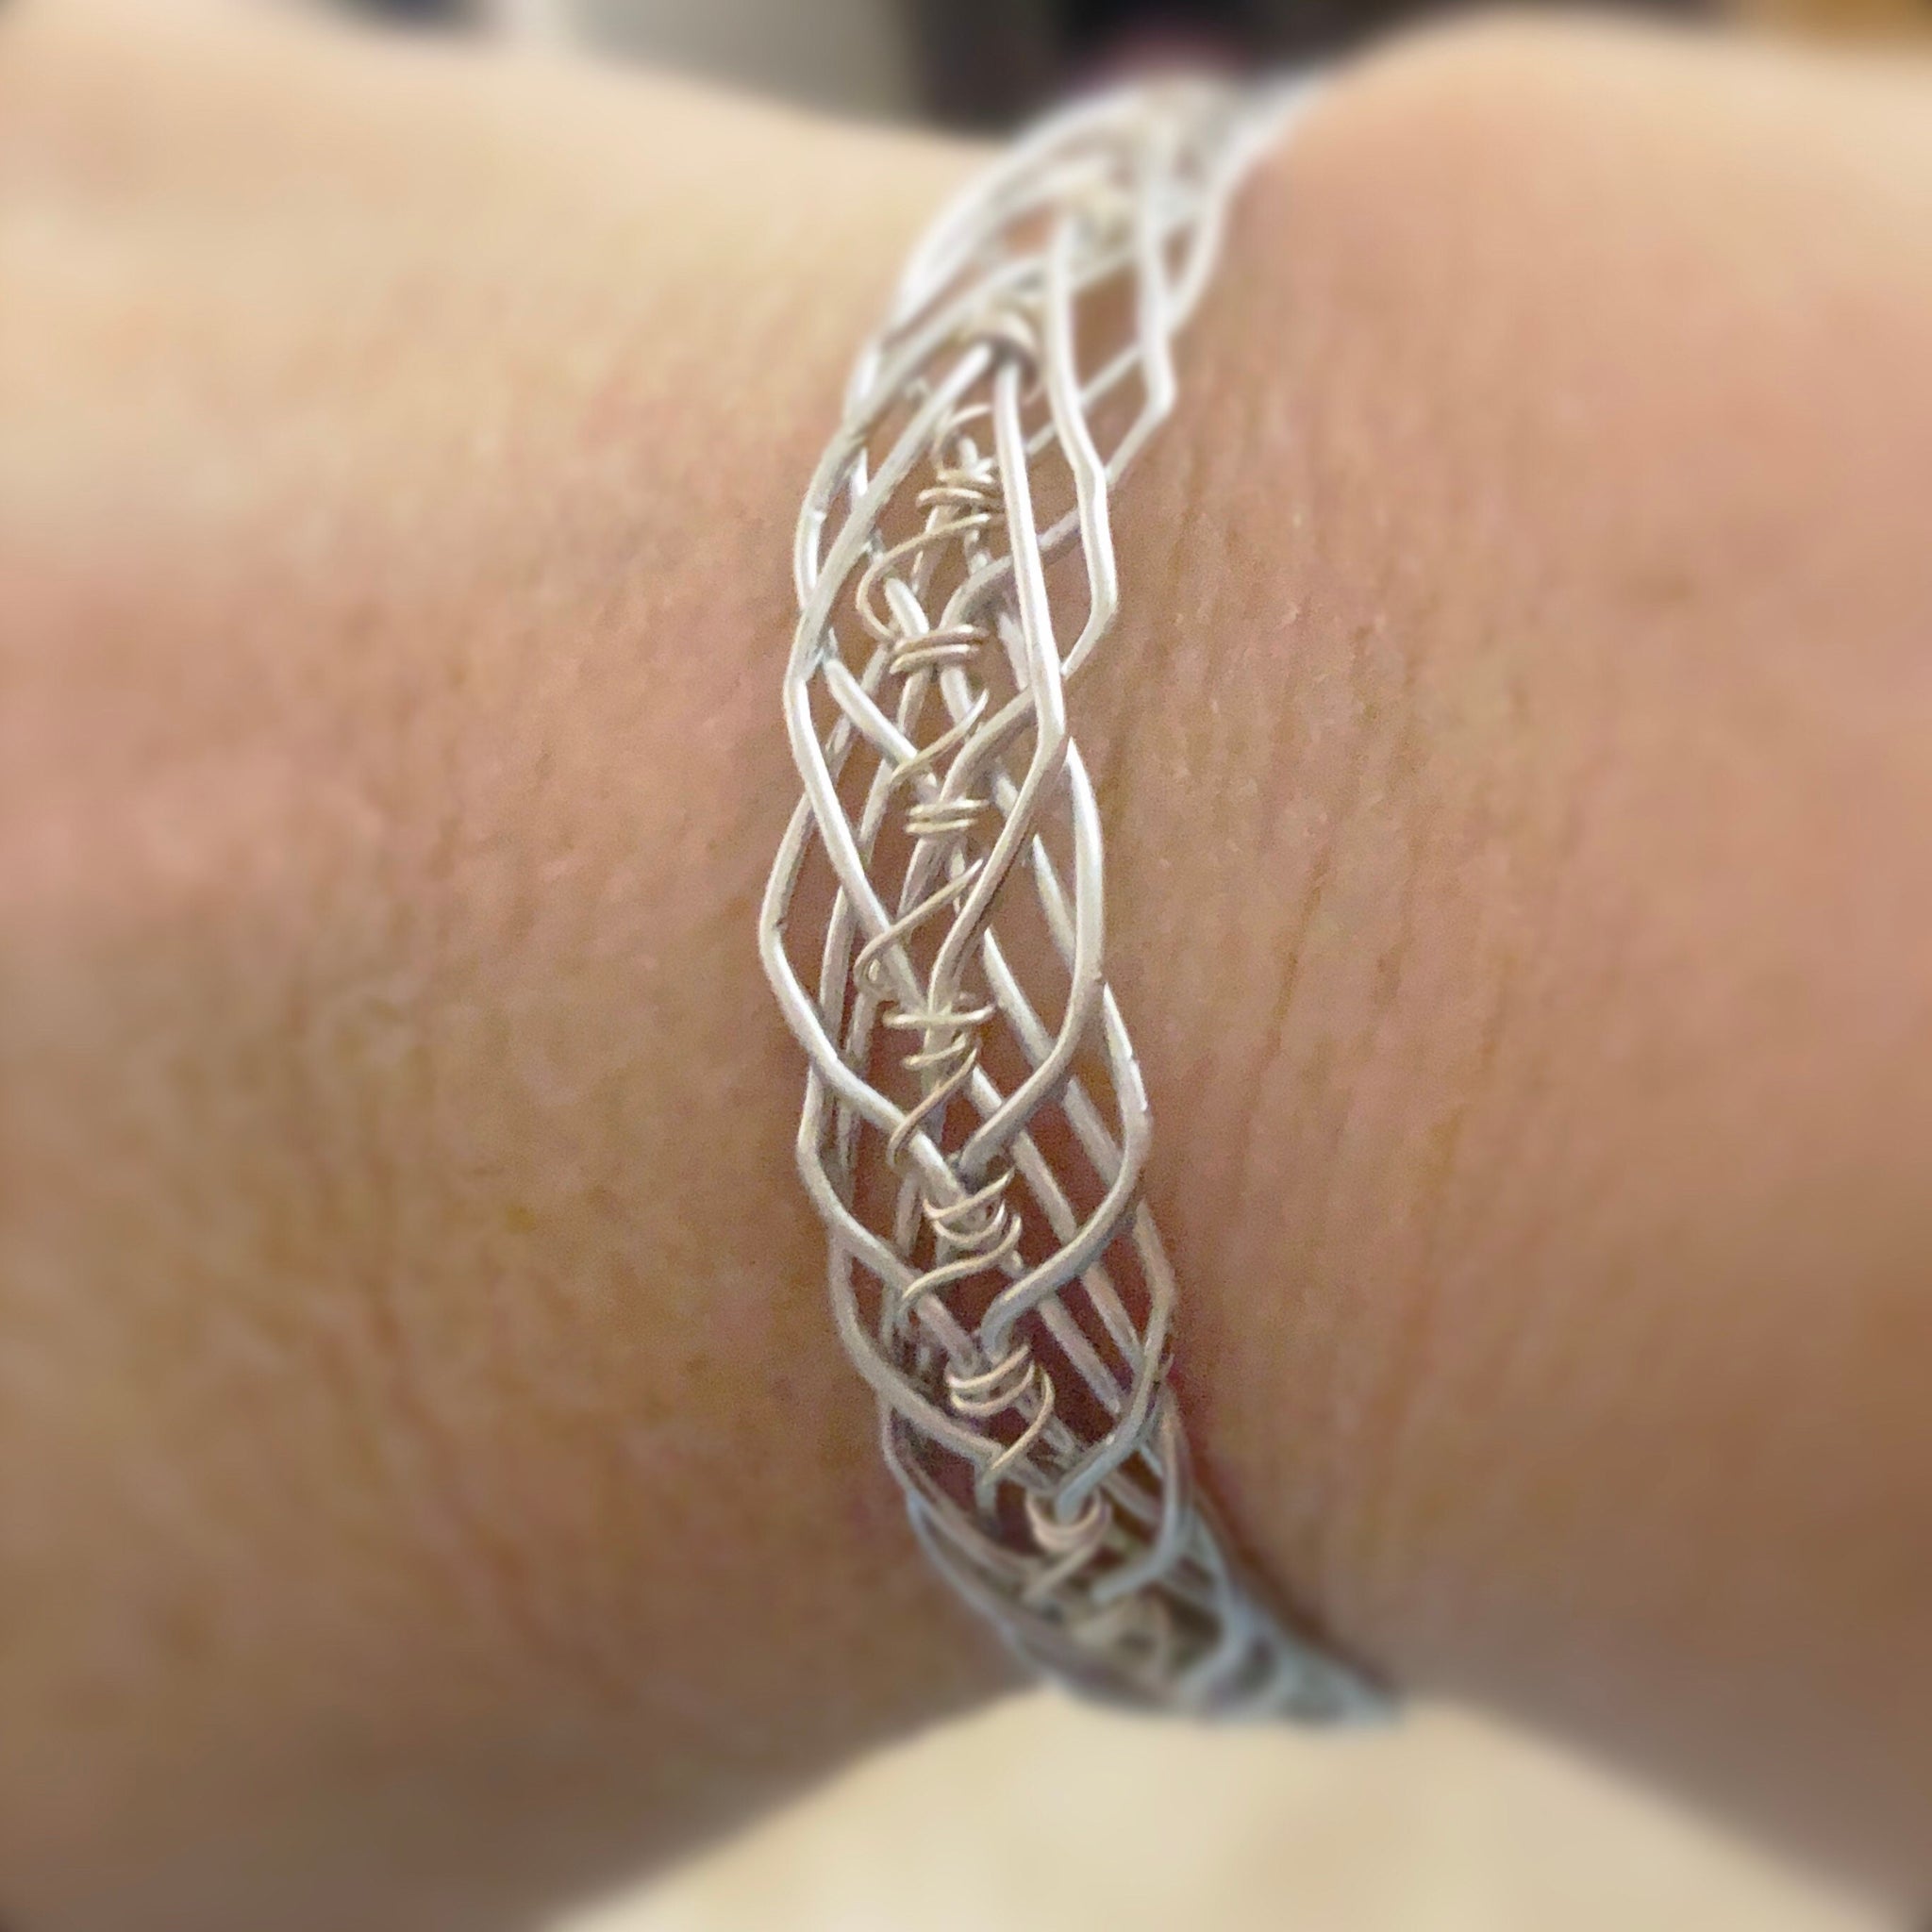 Wire Jewelry Making: 8 Tips for Wire Weaving and More - Interweave